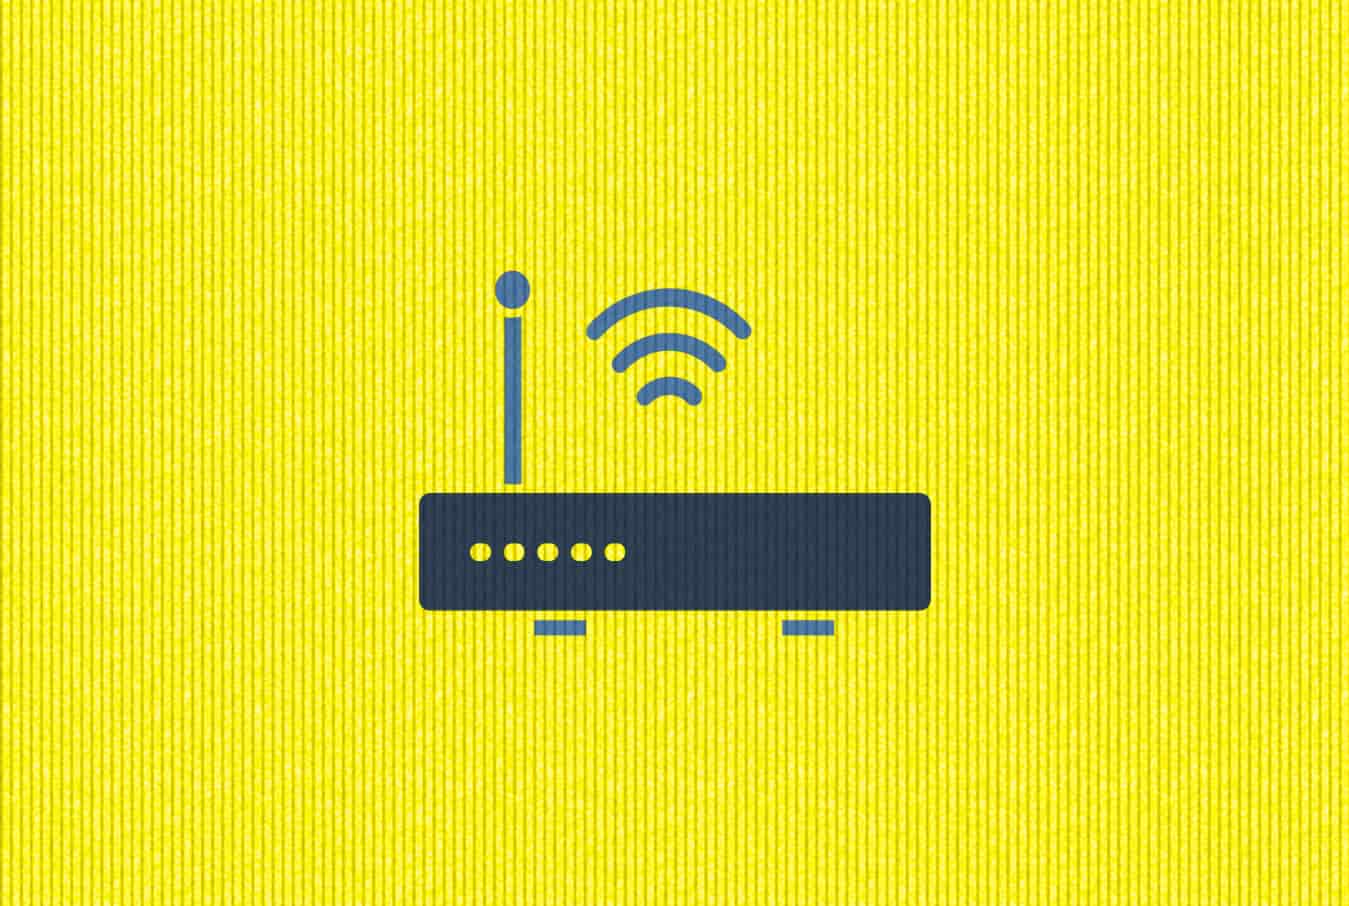 Wireless Router security: How to set up a WiFi router securely